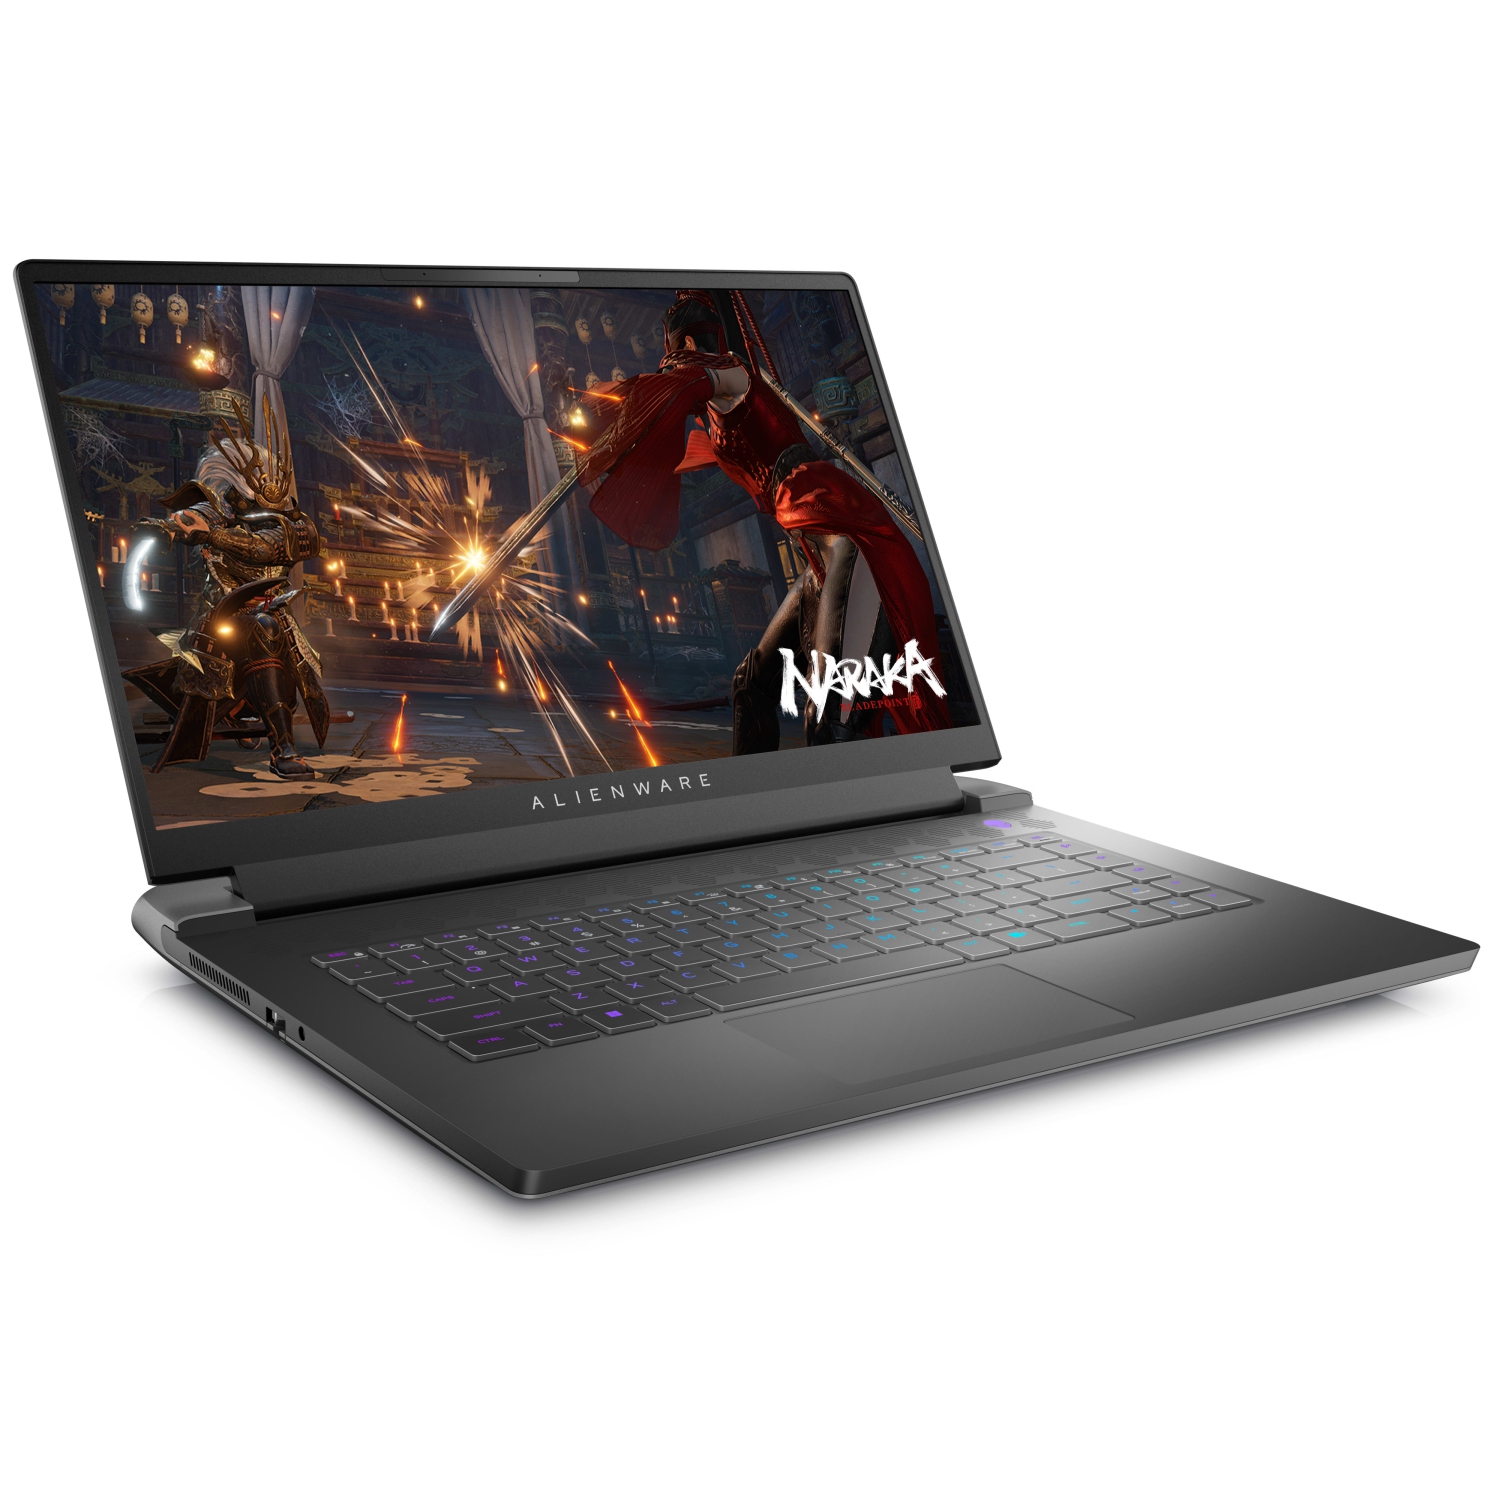 Refurbished (Excellent) – Dell Alienware m15 R7 Gaming Laptop (2022) | 15.6" FHD | Core i7 - 1TB SSD - 64GB RAM - 3070 Ti | 14 Cores @ 4.7 GHz - 12th Gen CPU - 8GB GDDR6X